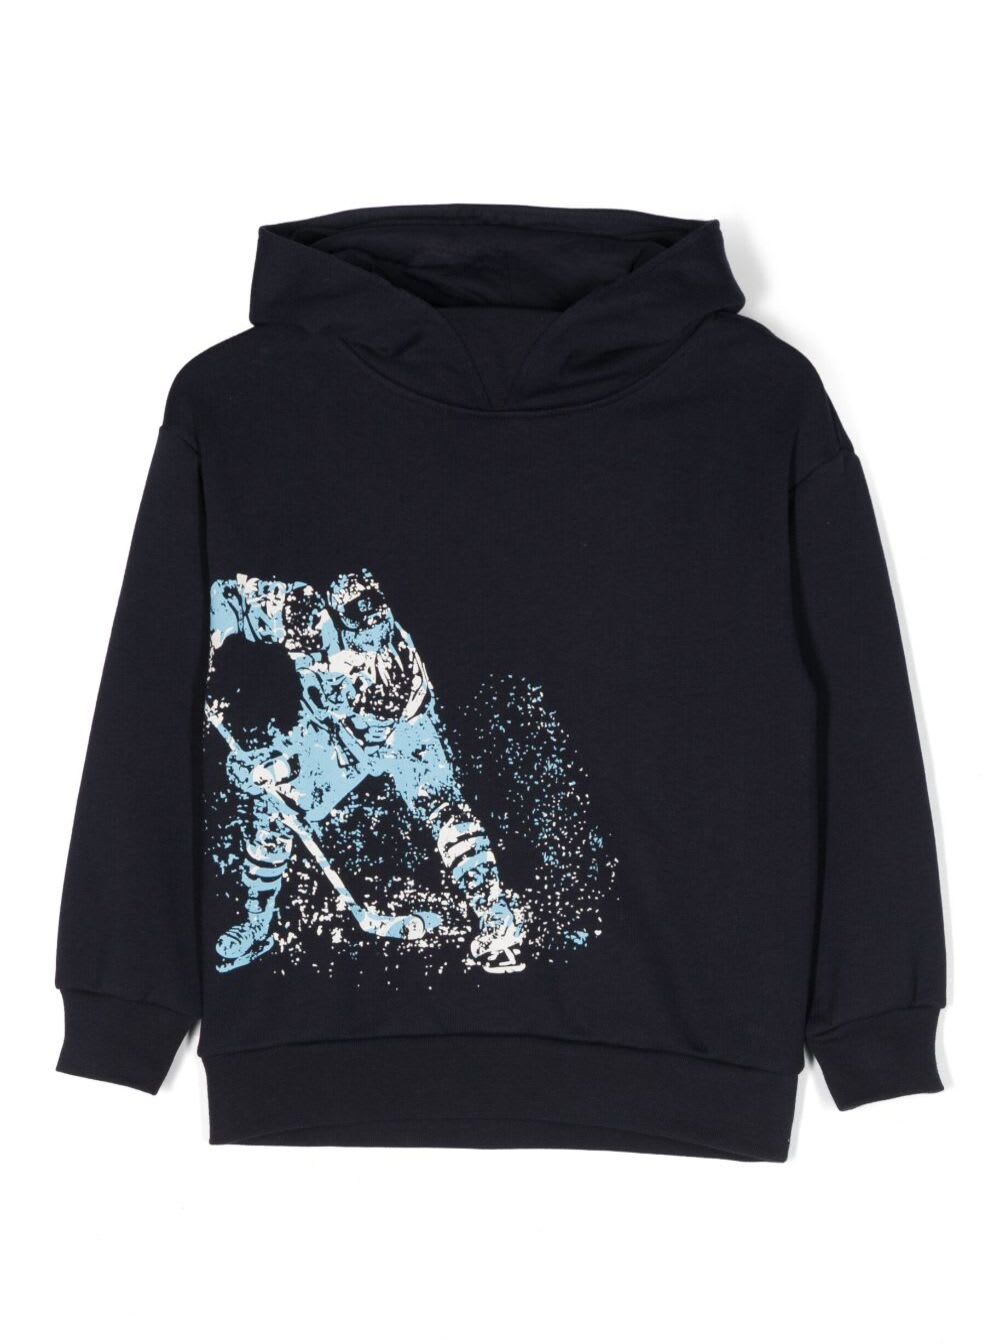 IL GUFO BLACK HOODIE AND TWO-TONE PRINT IN COTTON BOY